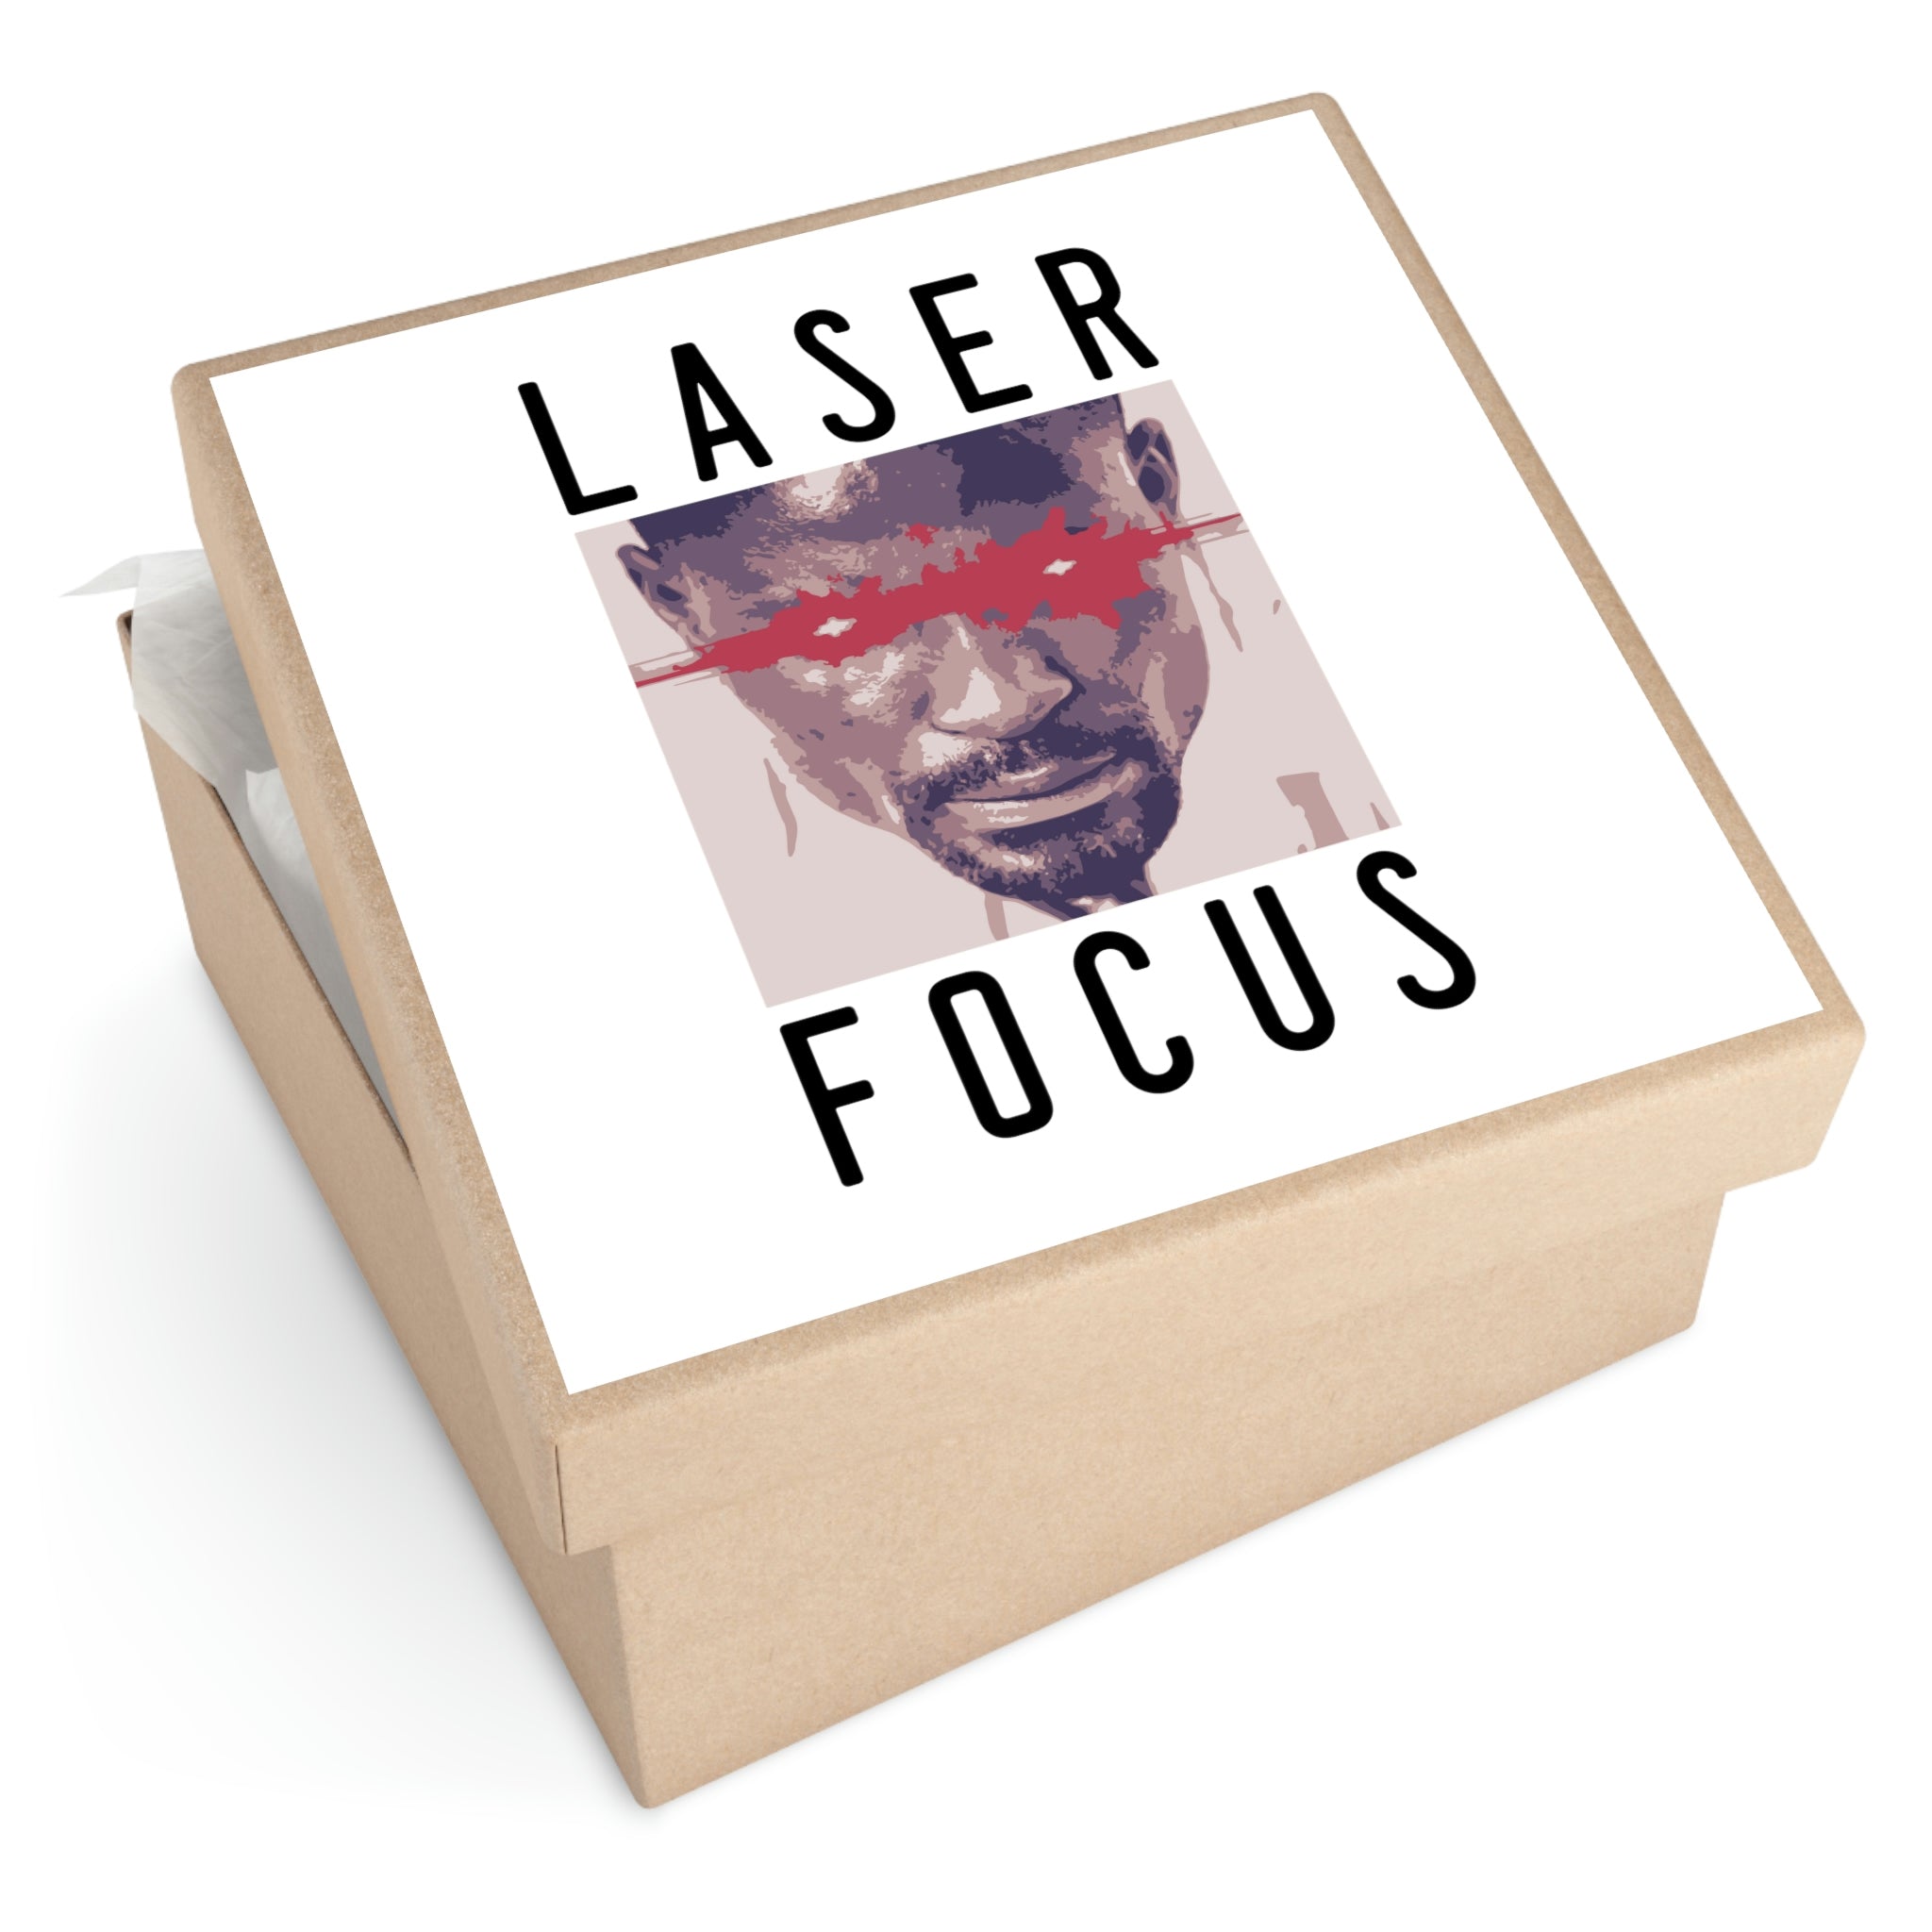 The power of focus quotes | Shop Laser focus sticker #size_15x15-inches